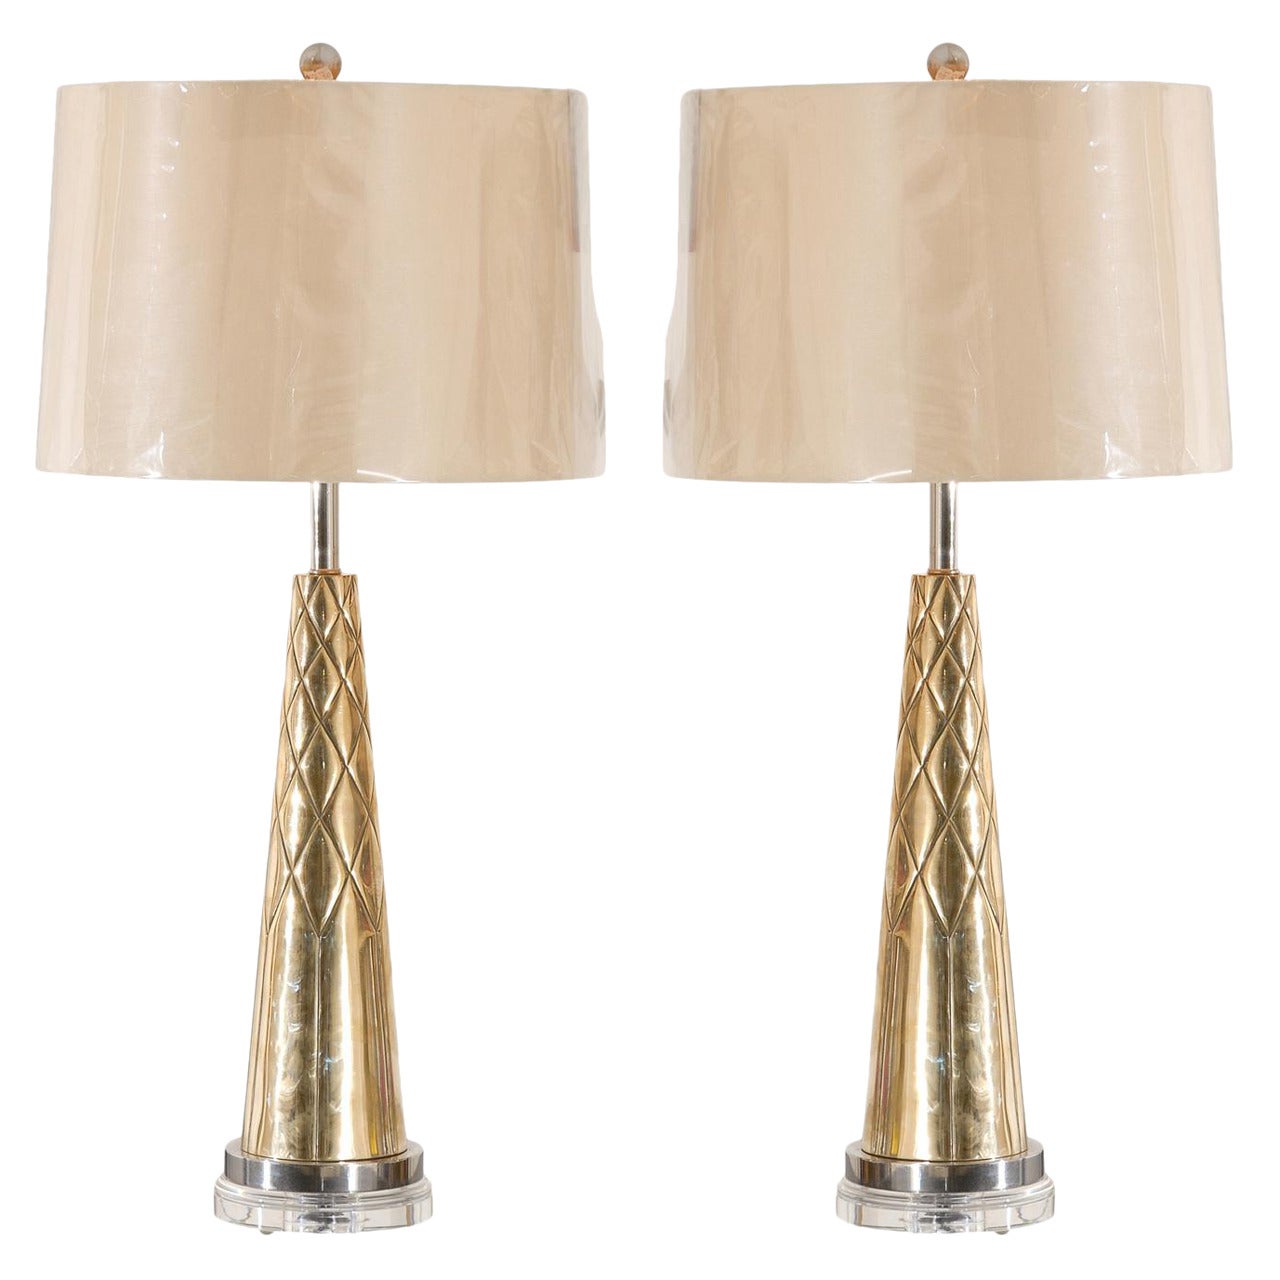 Exquisite Pair of Modern Etched Cone Lamps in Nickel and Brass For Sale